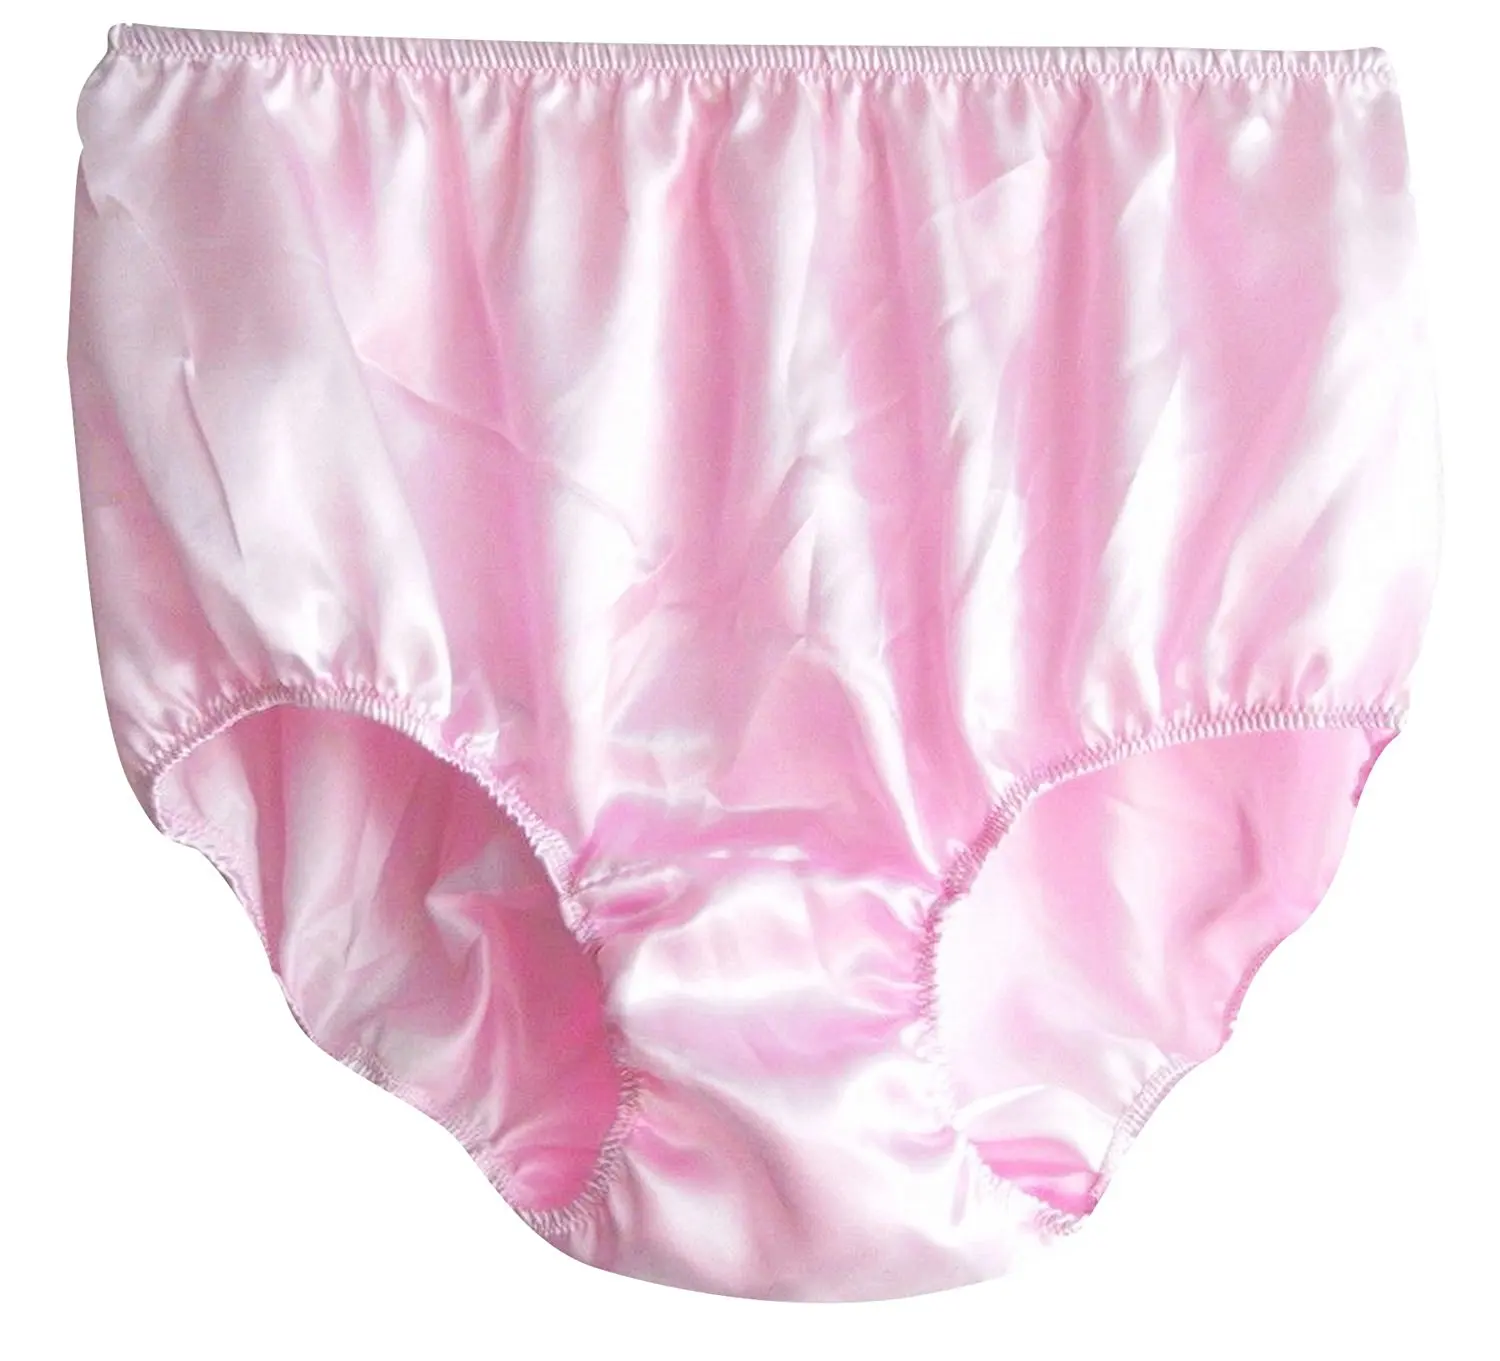 Cheap Pink Satin Sissy, find Pink Satin Sissy deals on line at Alibaba.com